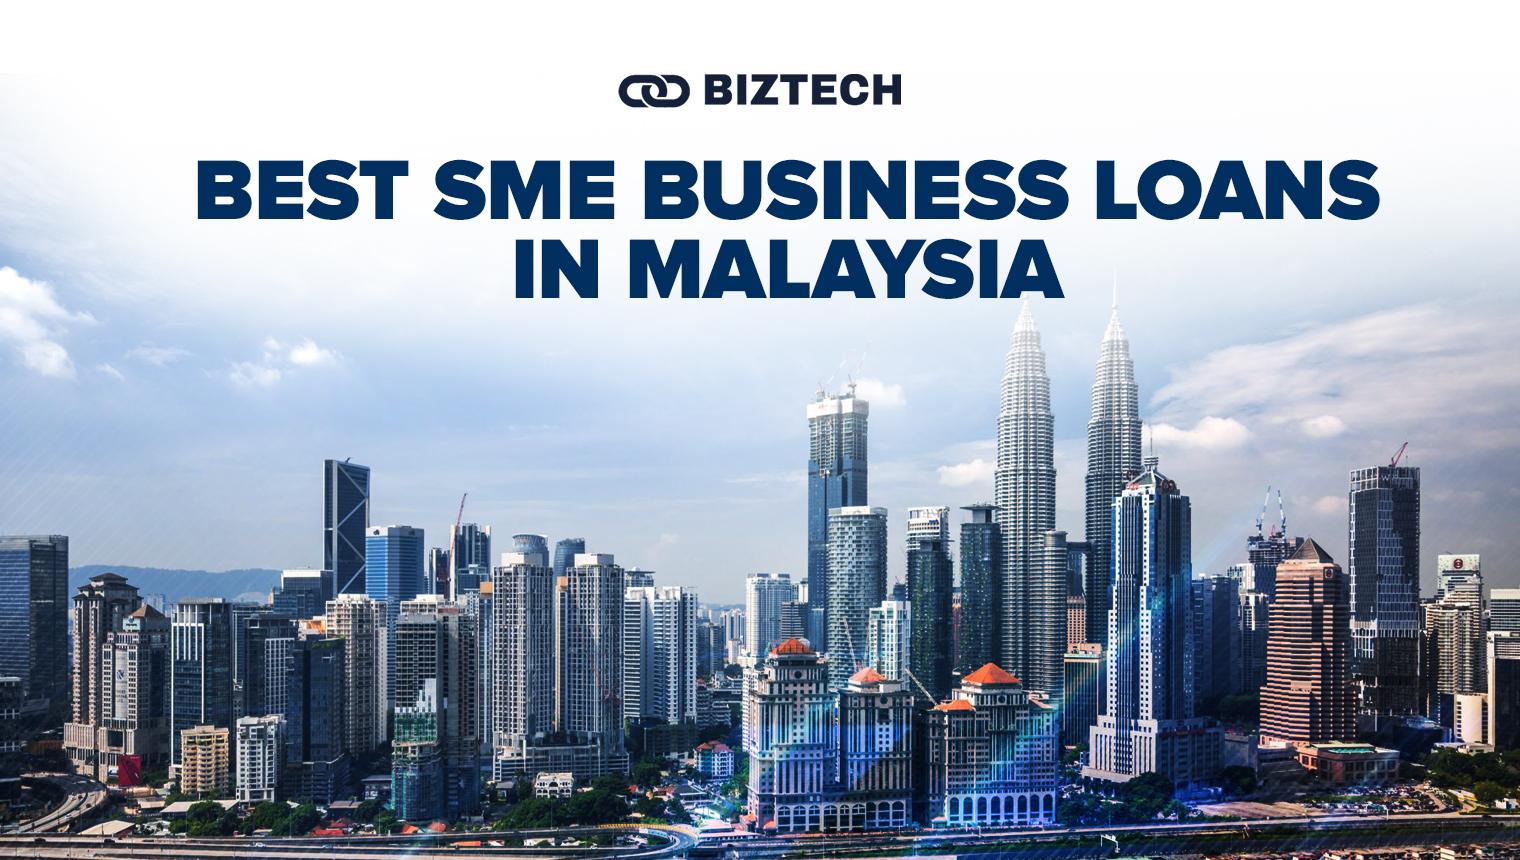 Guide to Best Small Business / SME Loans in Malaysia